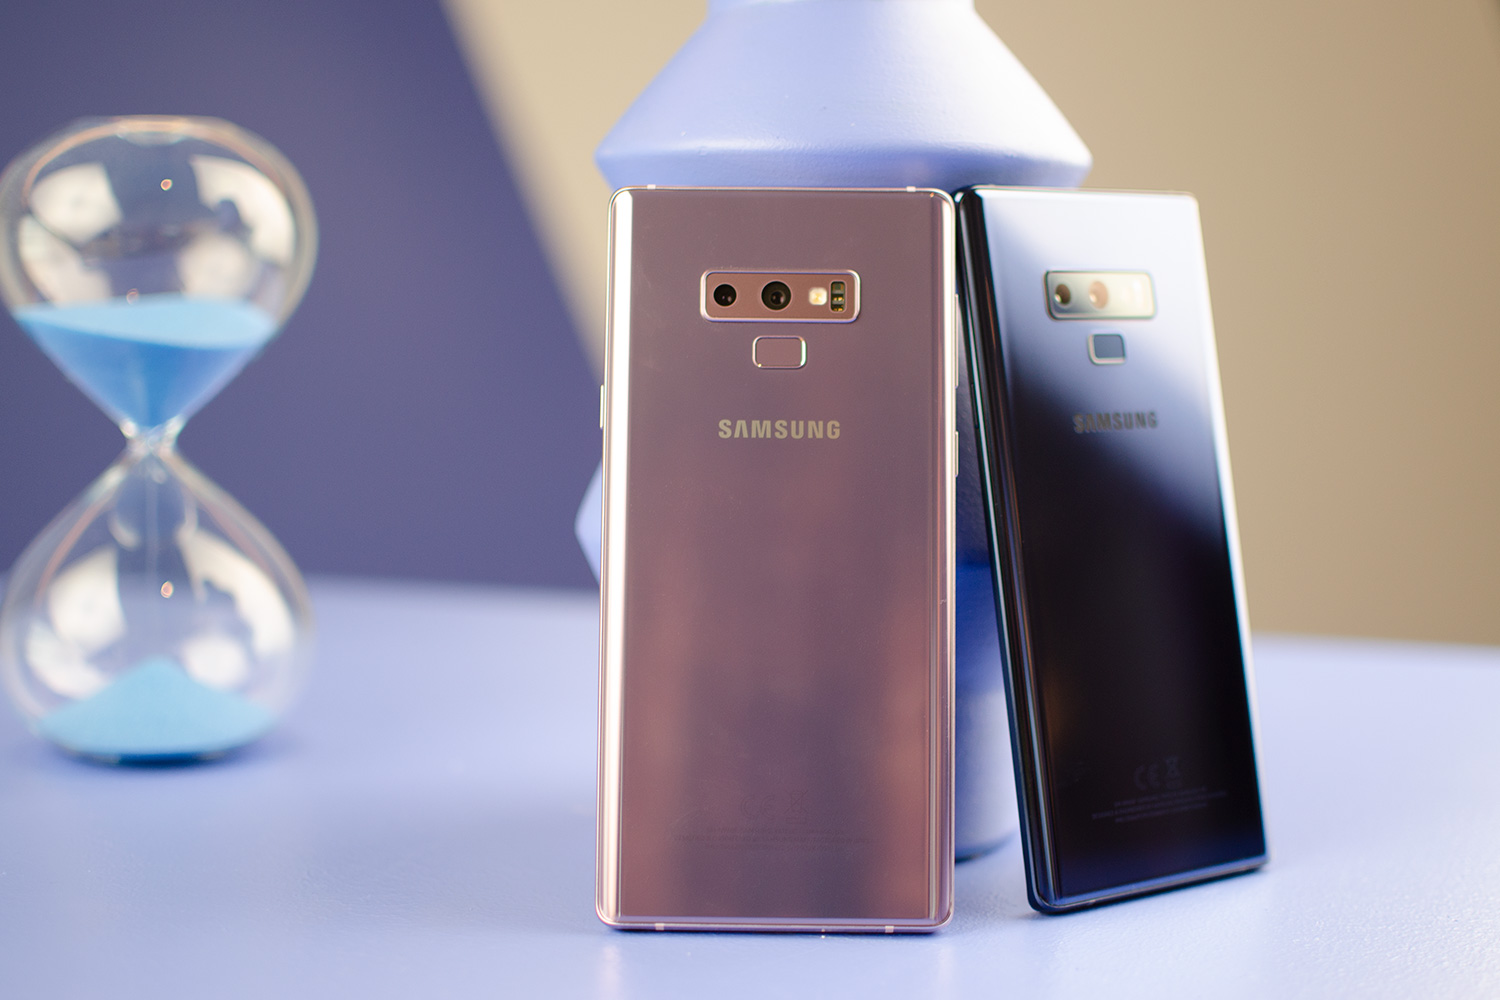 Galaxy Note 9 Vs Galaxy S9+: What's The Difference?